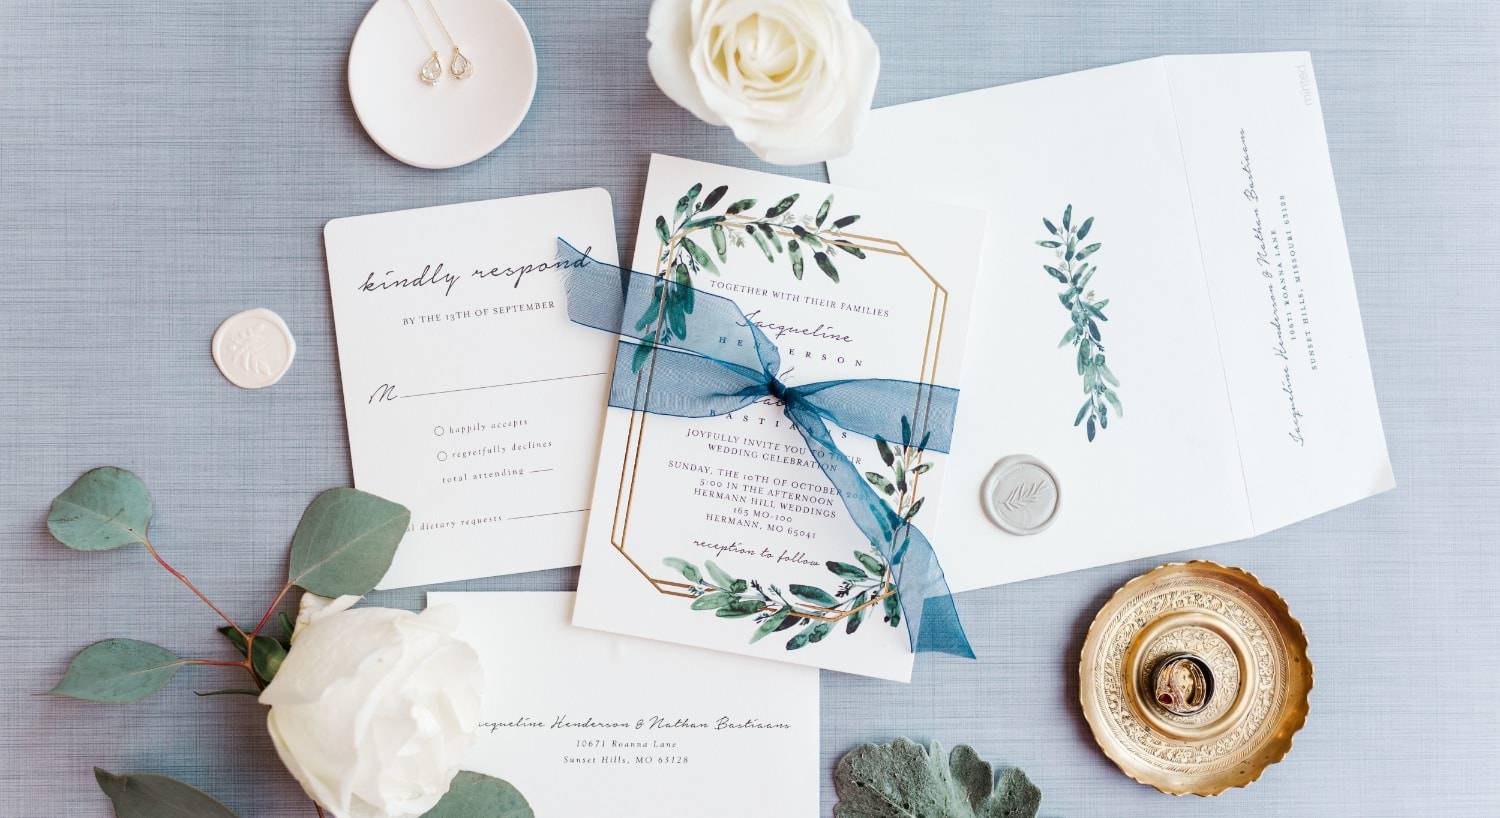 All pieces of a wedding invitation spread out on blue fabric